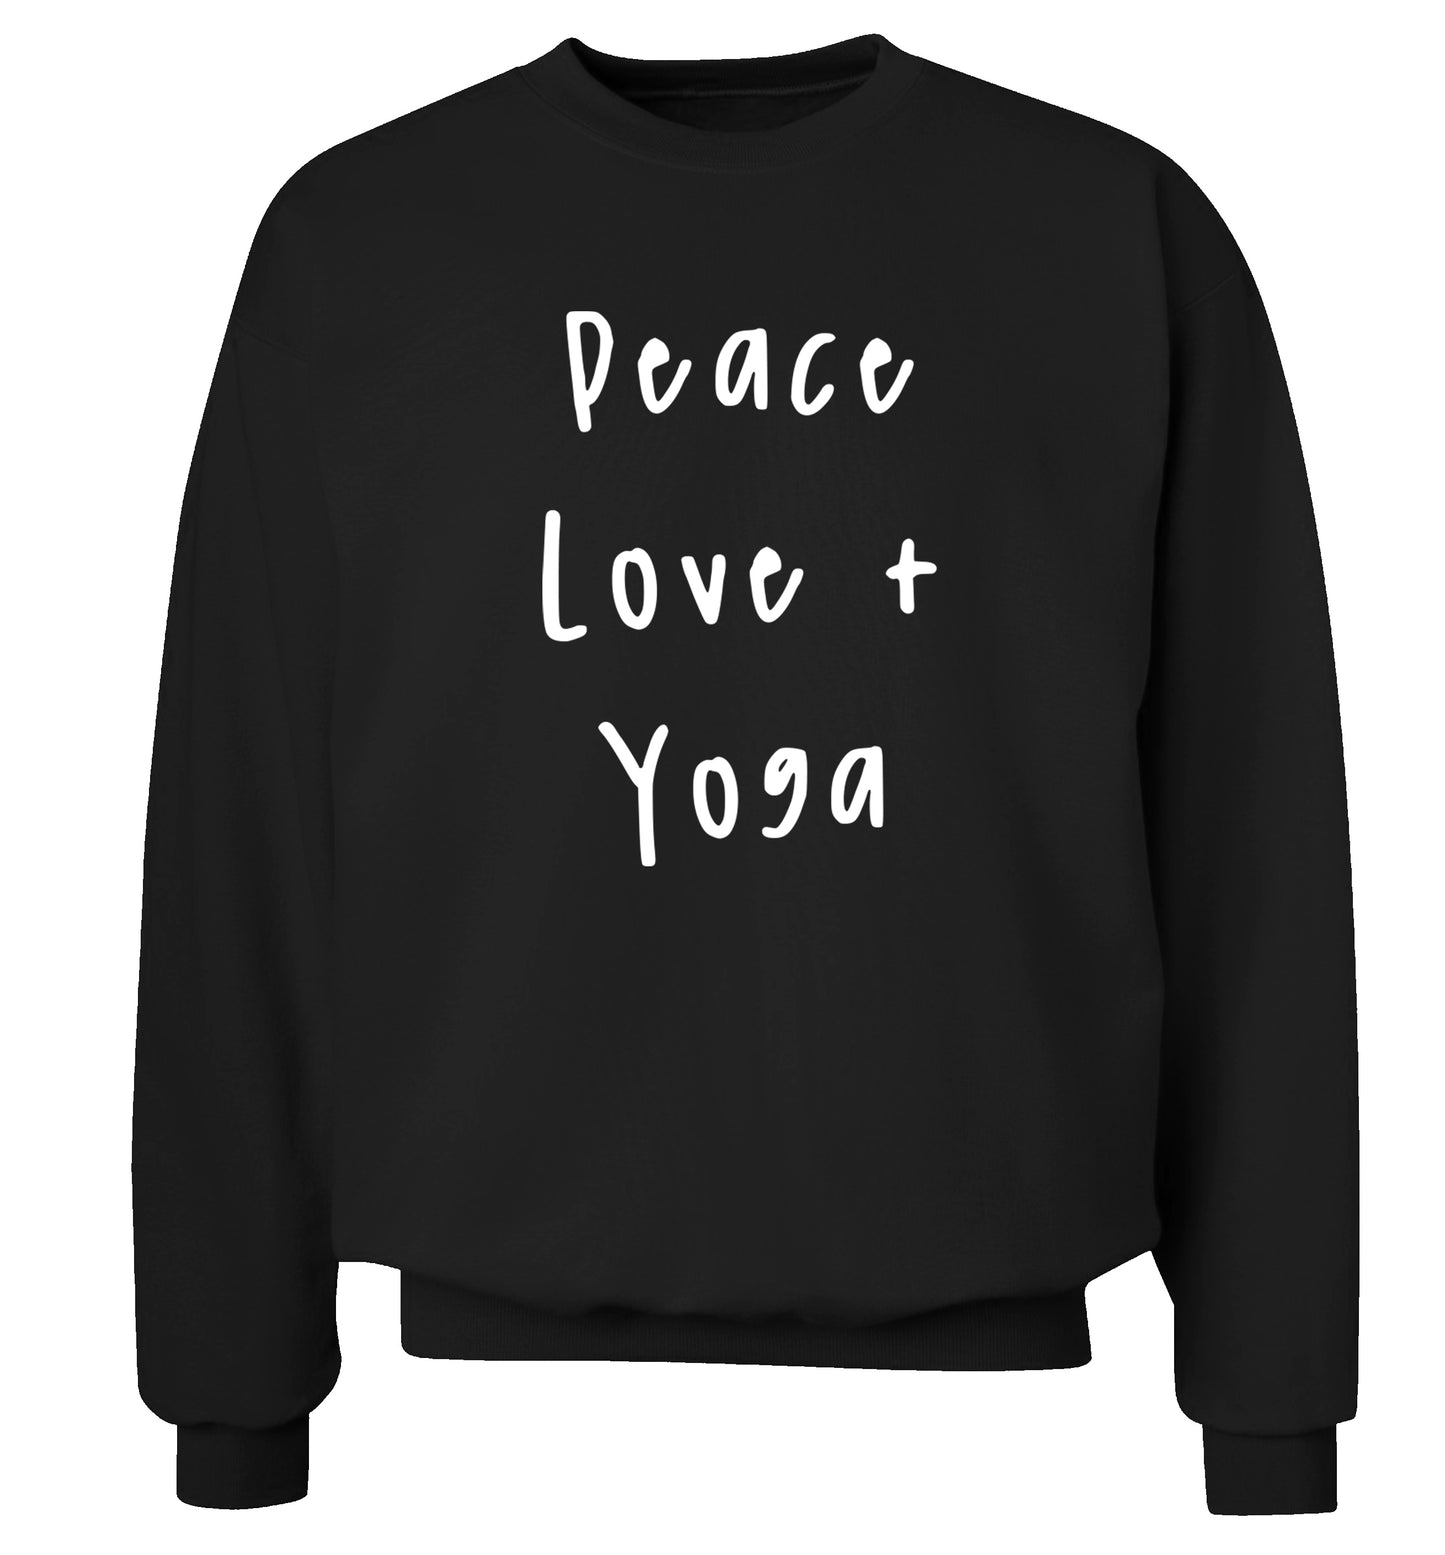 Peace love and yoga Adult's unisex black Sweater 2XL